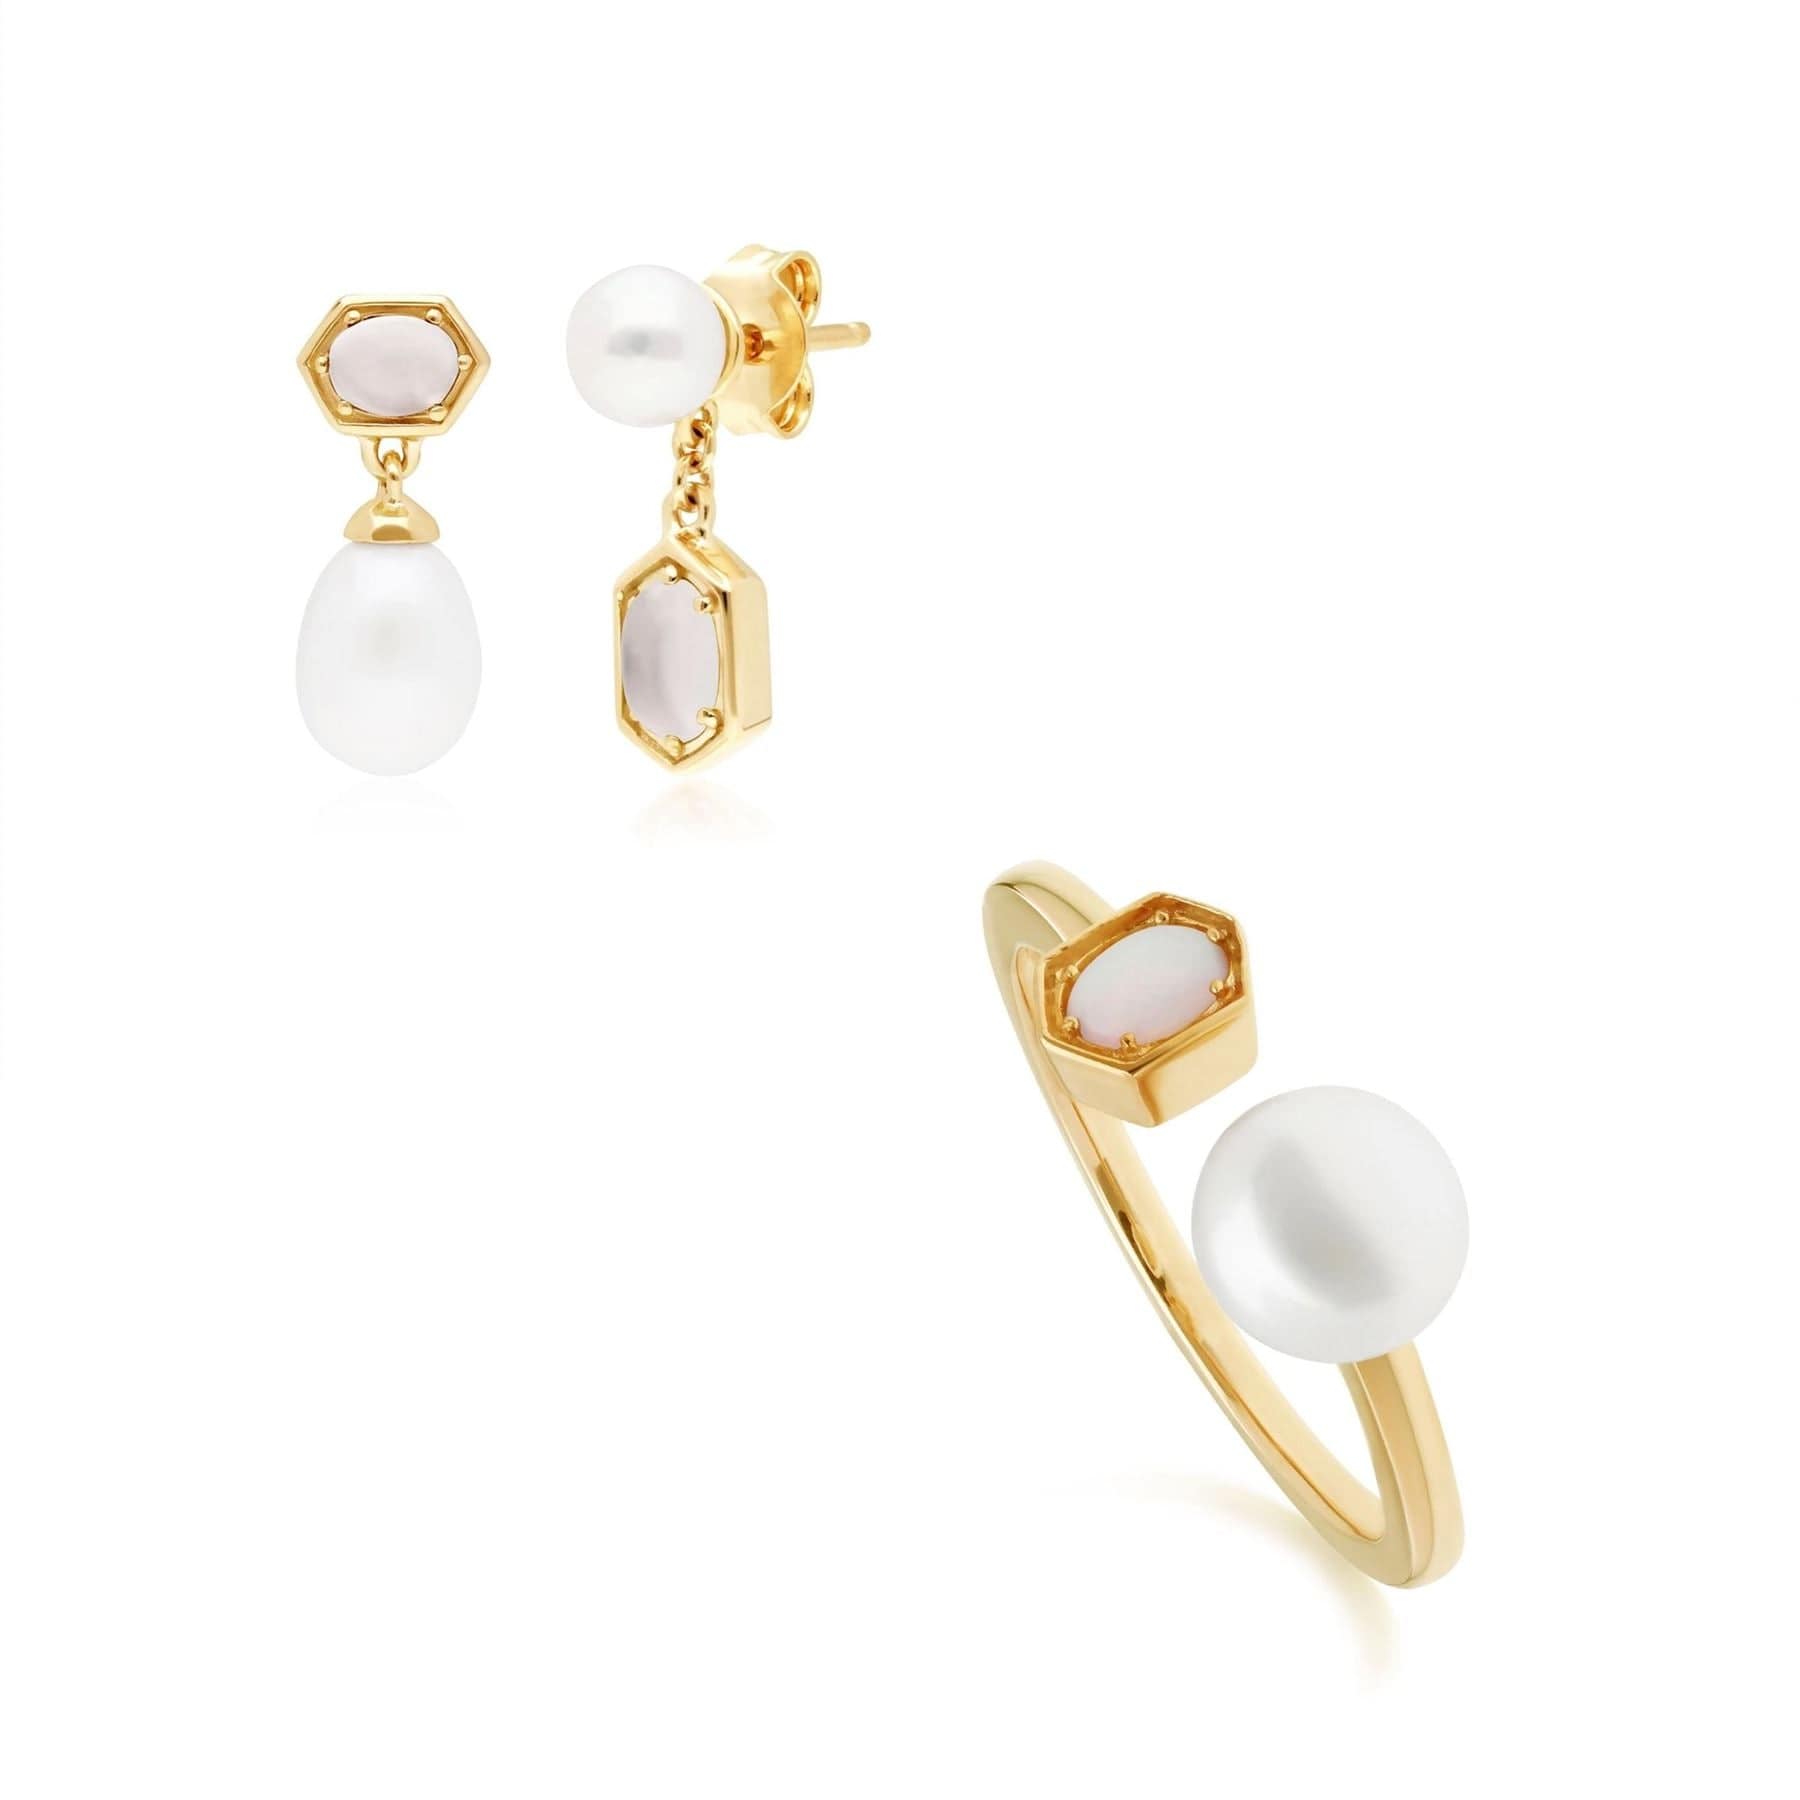 Modern Pearl & Moonstone Earring & Ring Set in Gold Plated Silver - Gemondo